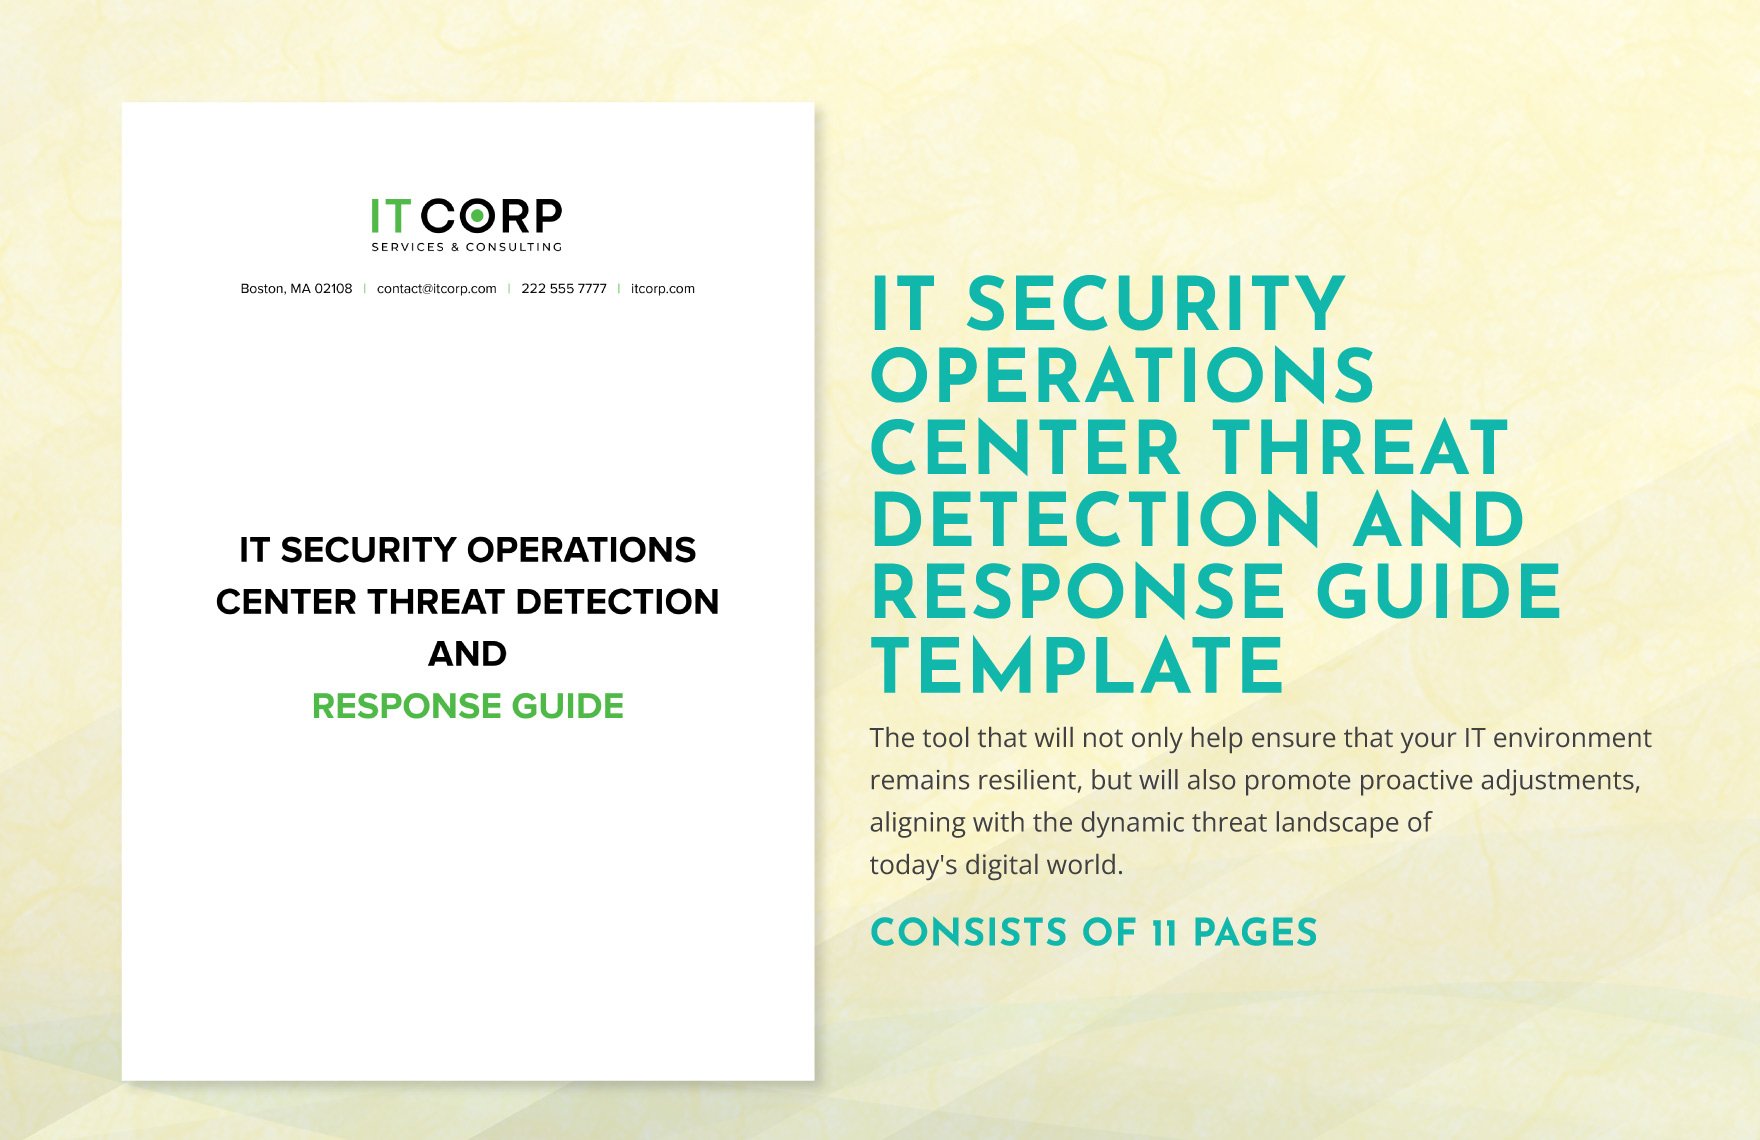 IT Security Operations Center Threat Detection and Response Guide Template